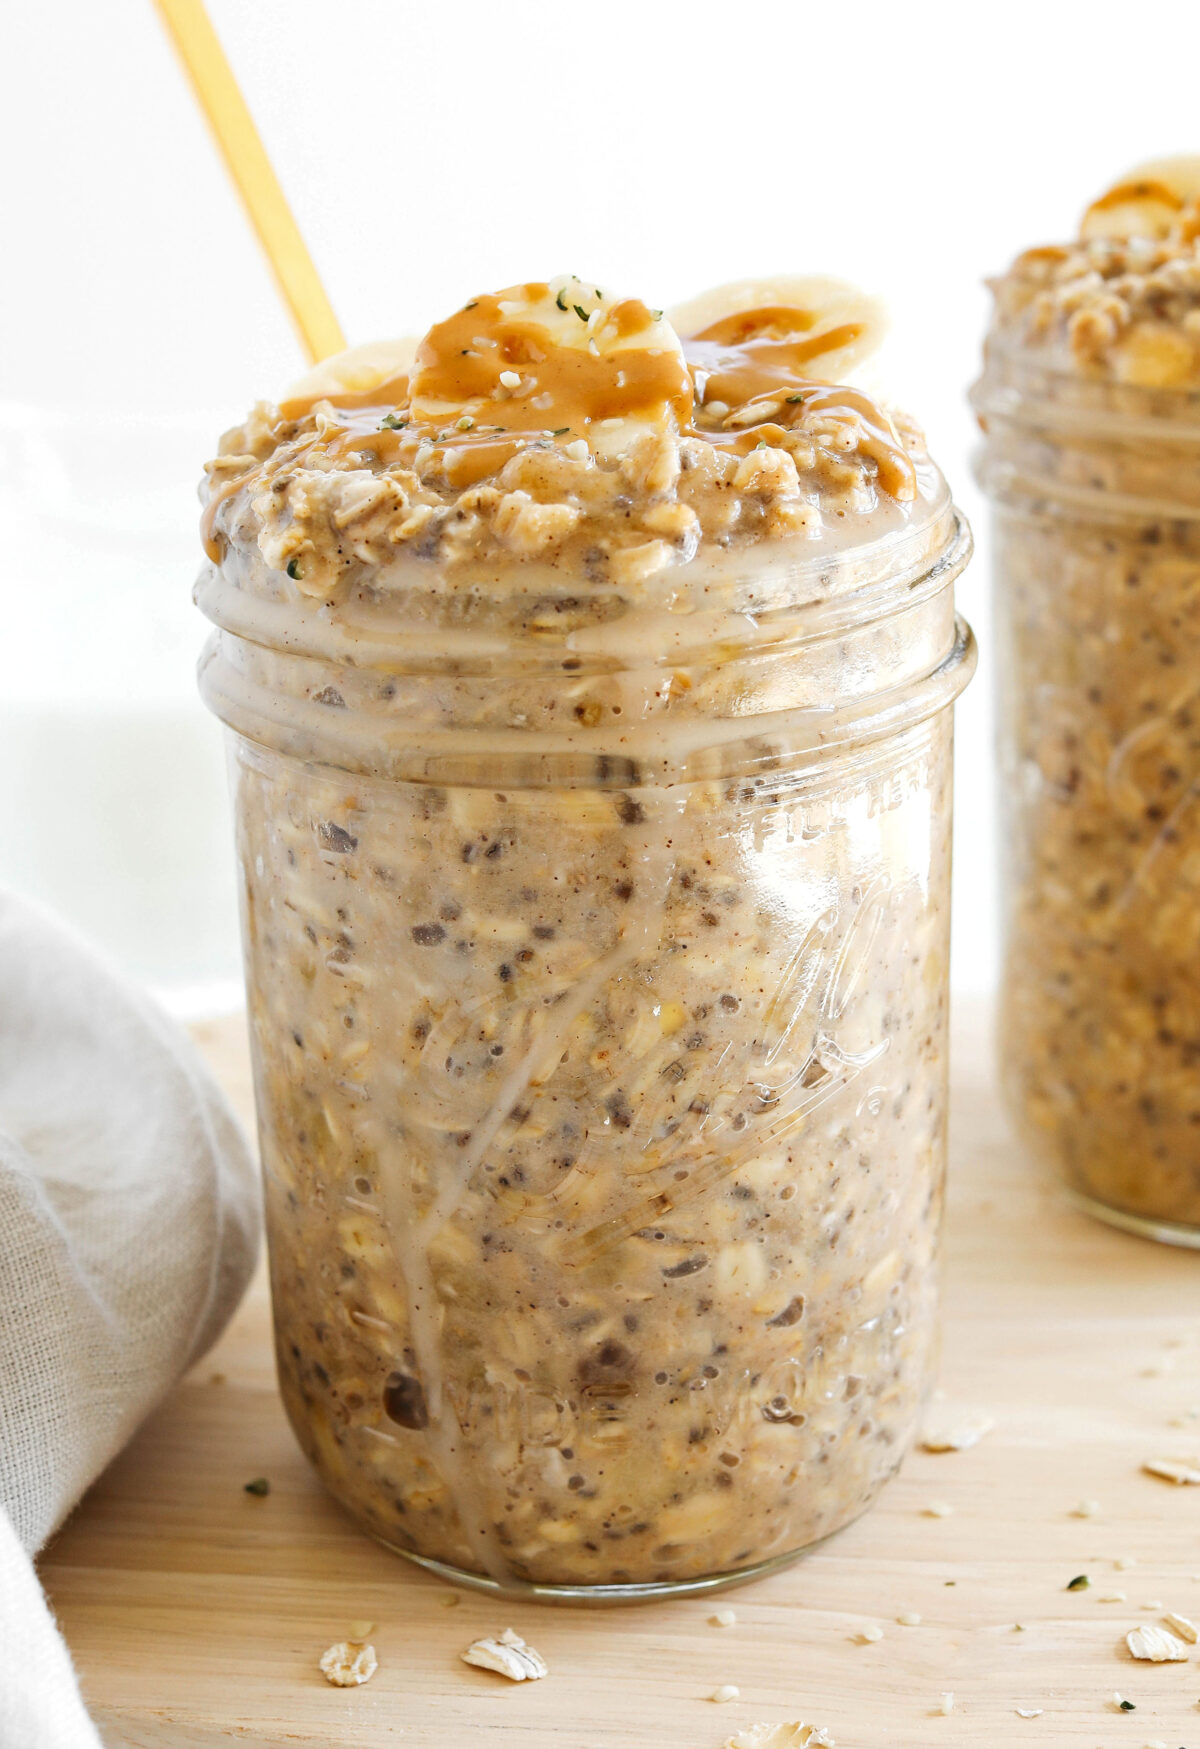 Easy Peanut Butter Banana Overnight Oats that you can easily make-ahead of time in just minutes the night before giving you a deliciously healthy breakfast as soon as you wake up!